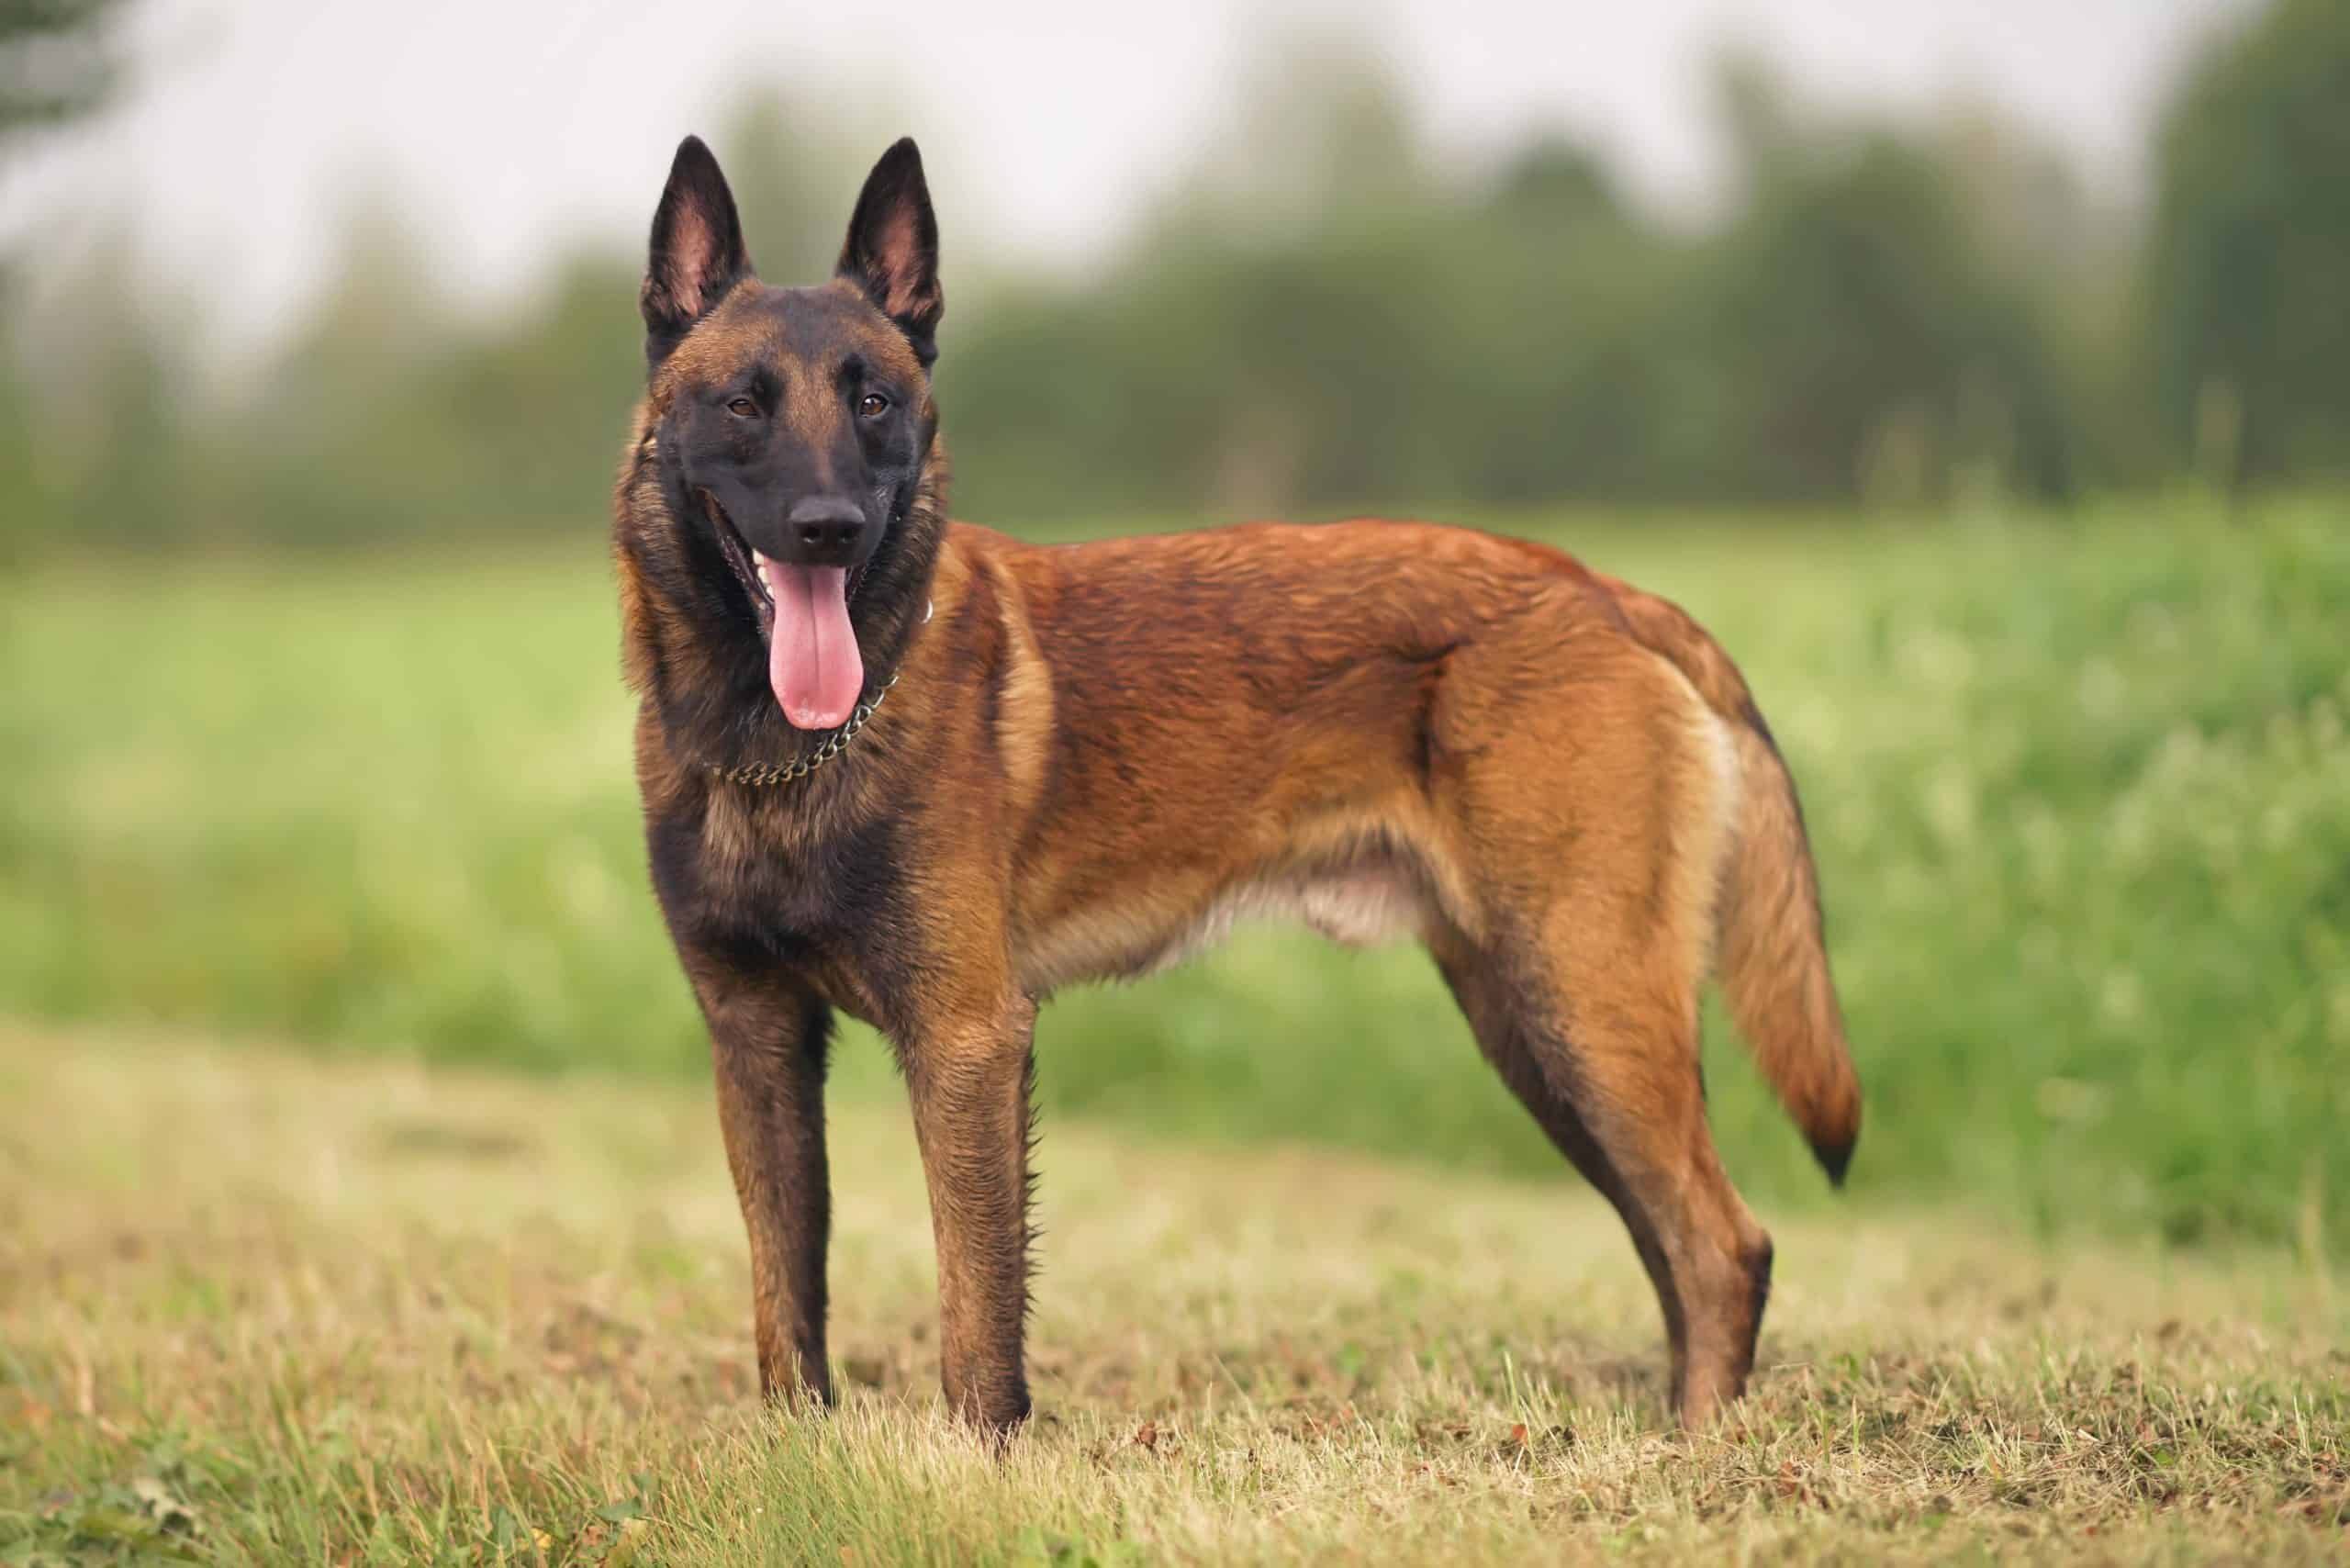 Belgian Malinois: Smart dogs often used for police or military work